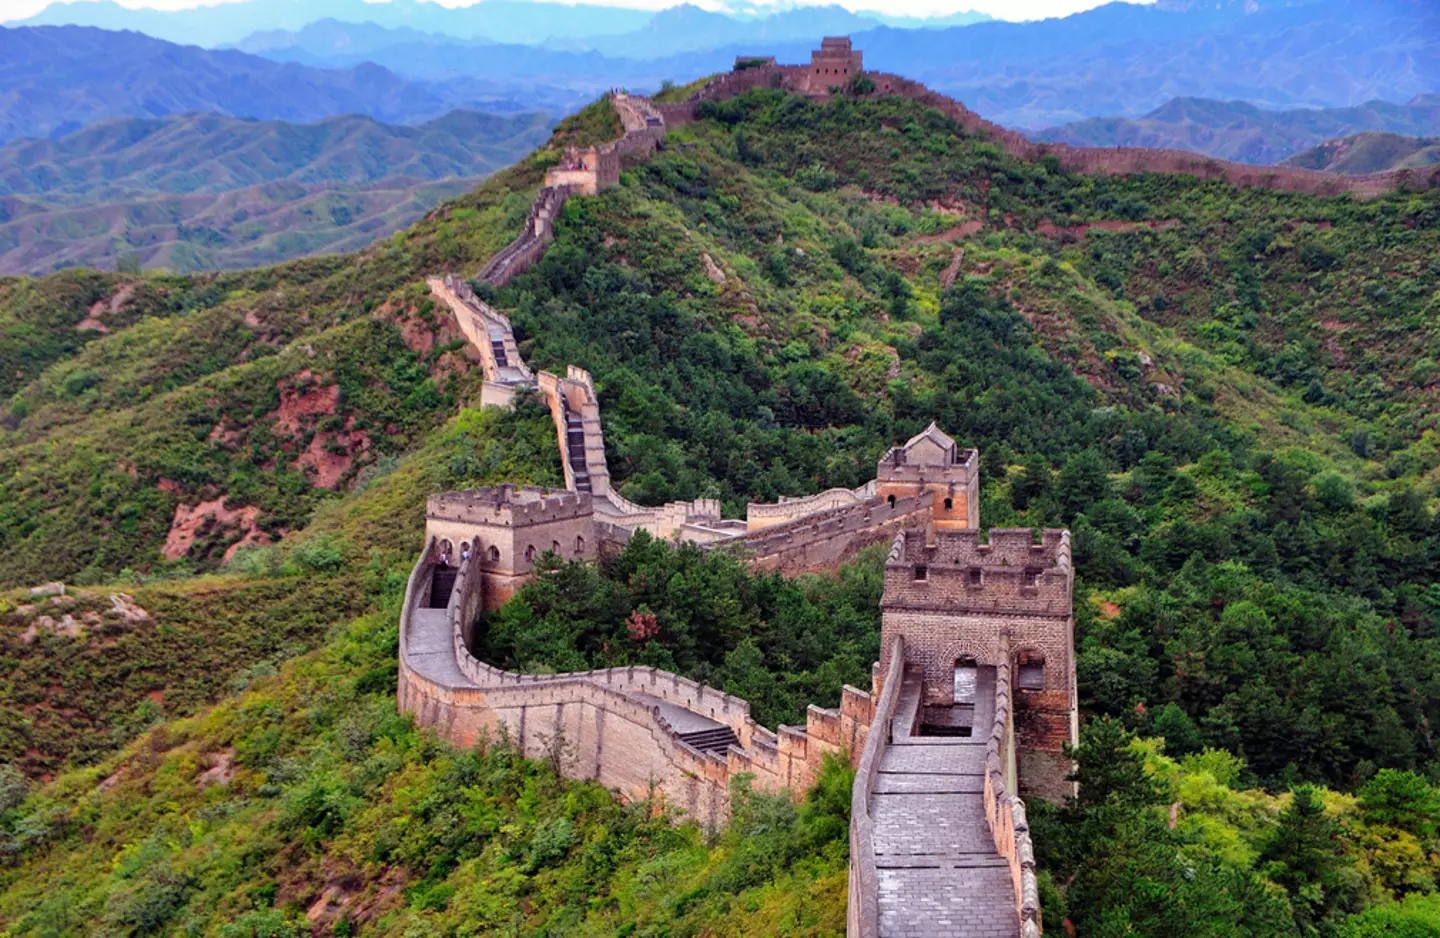 The Great Wall of China is one of the world's most iconic landmarks.